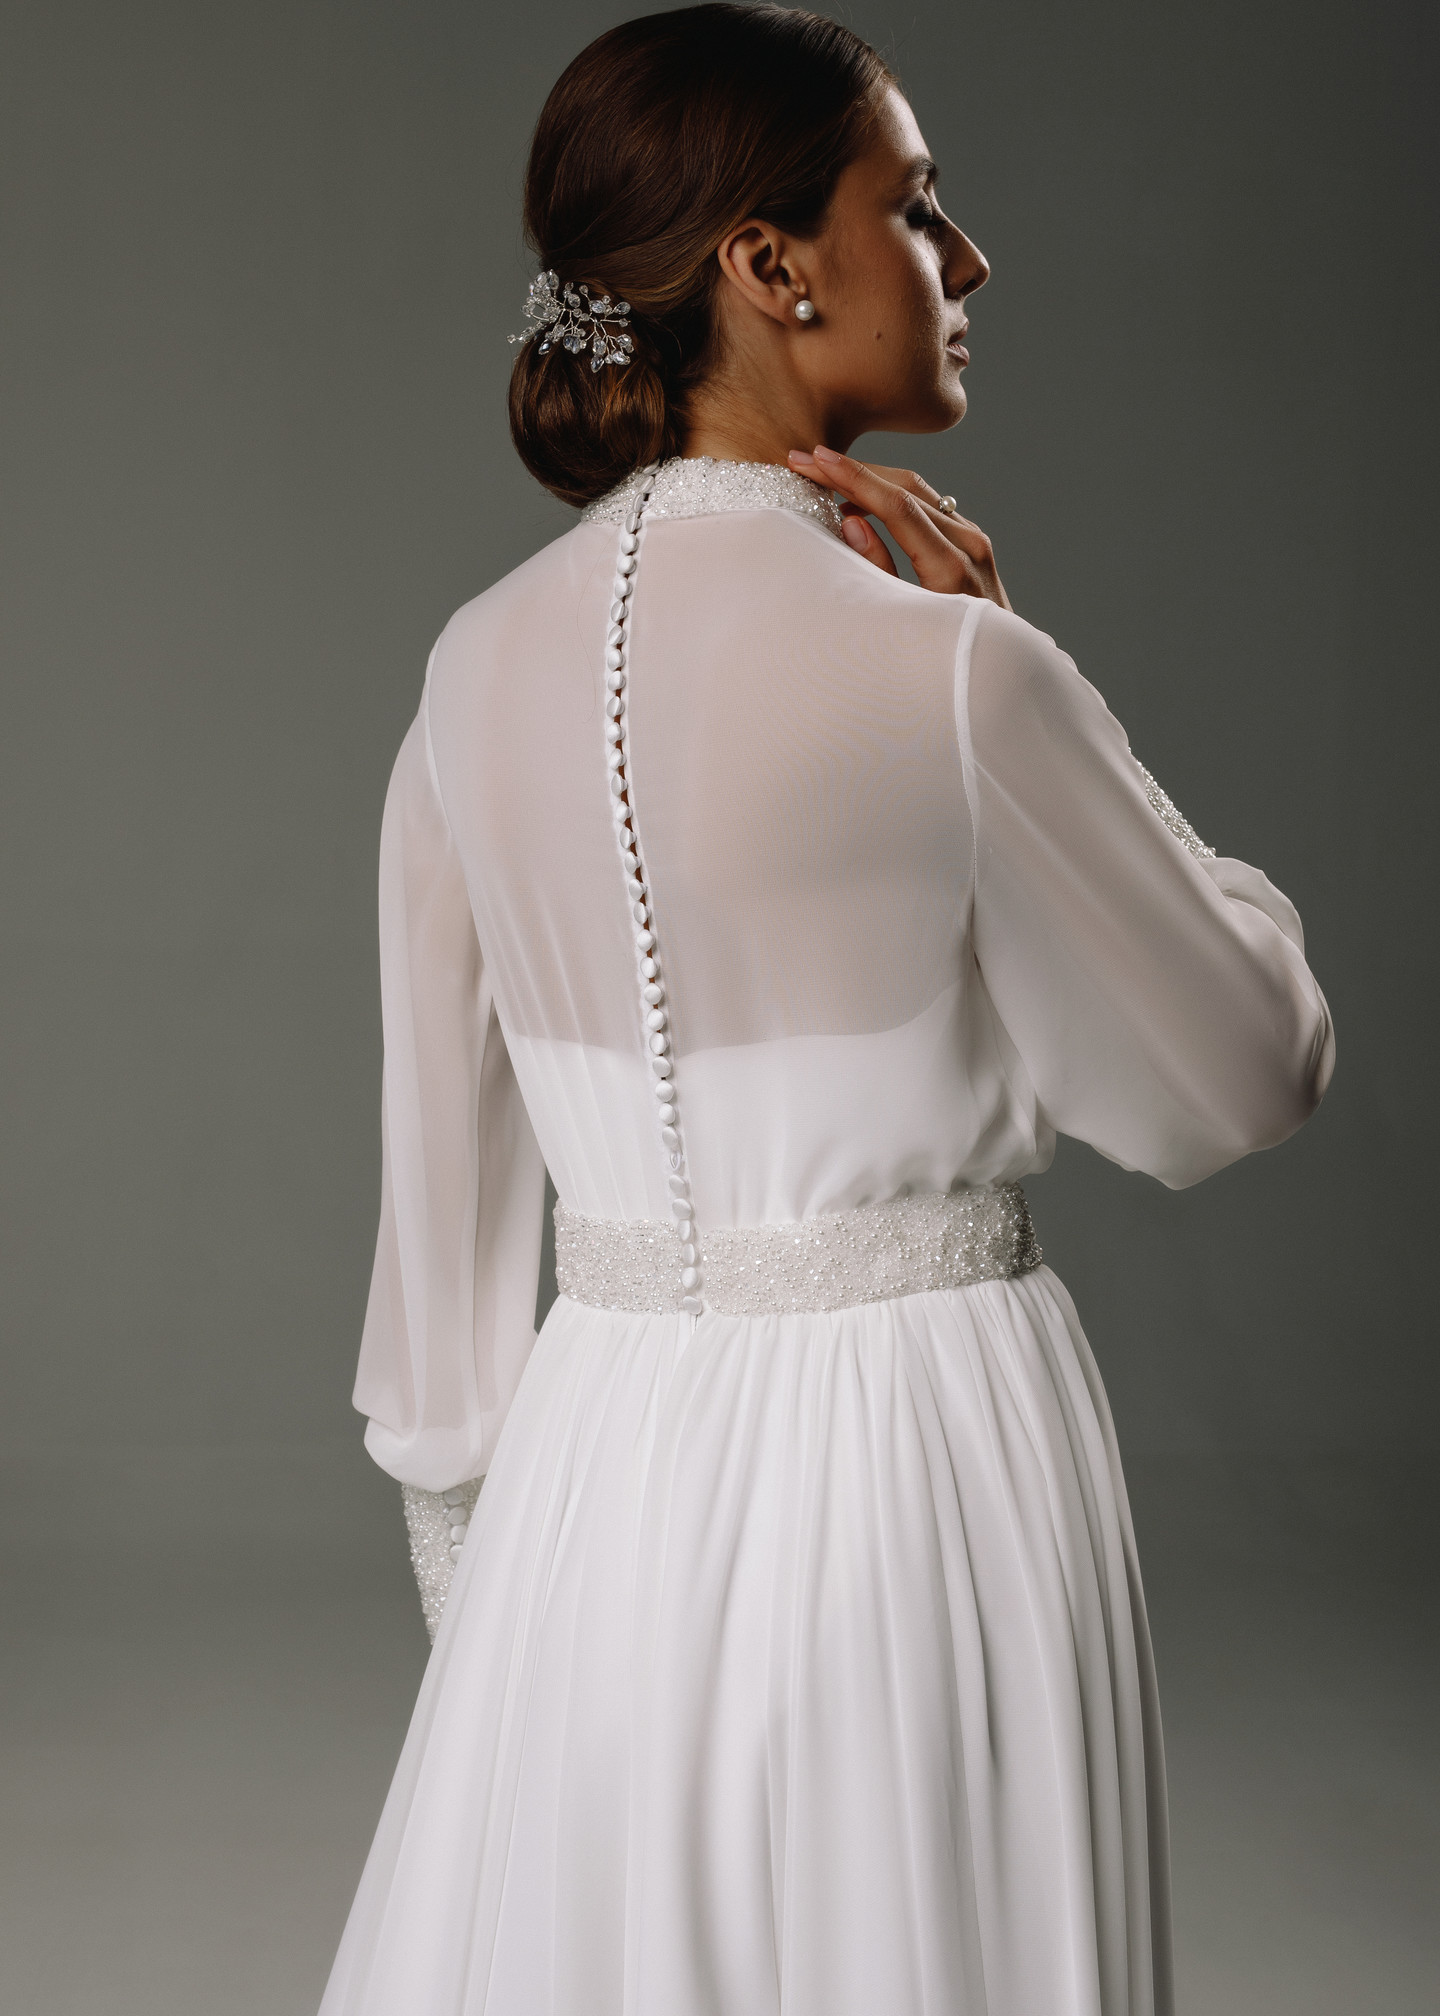 Teona gown, 2020, couture, dress, bridal, off-white, chiffon, embroidery, sleeves, A-line, popular